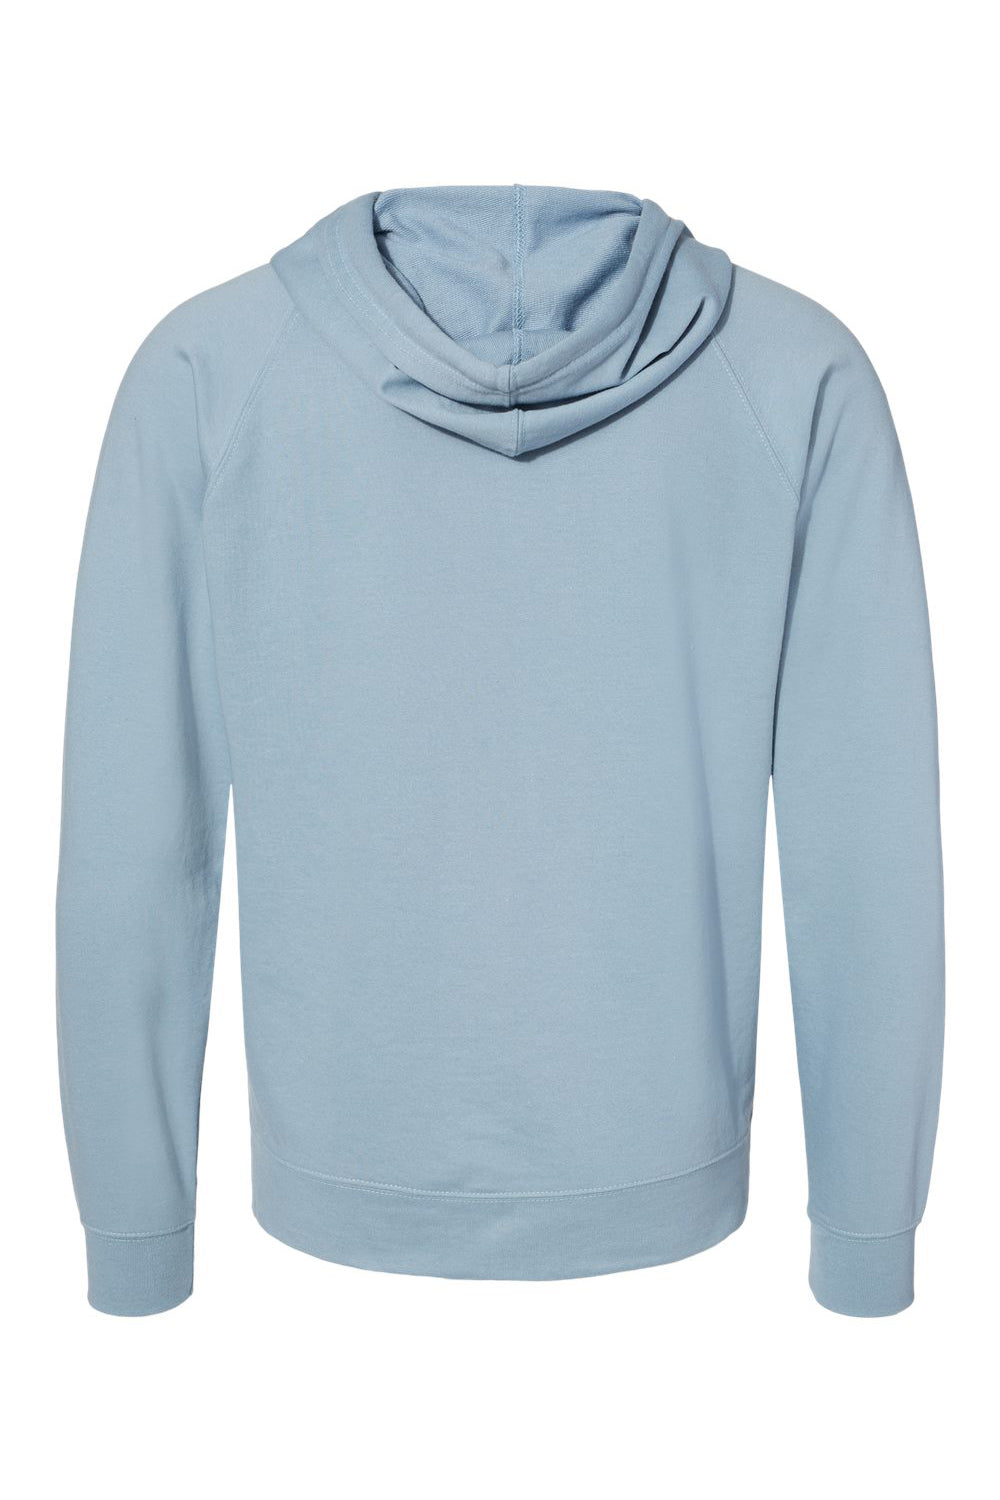 Independent Trading Co. SS1000Z Mens Icon Loopback Terry Full Zip Hooded Sweatshirt Hoodie Misty Blue Flat Back